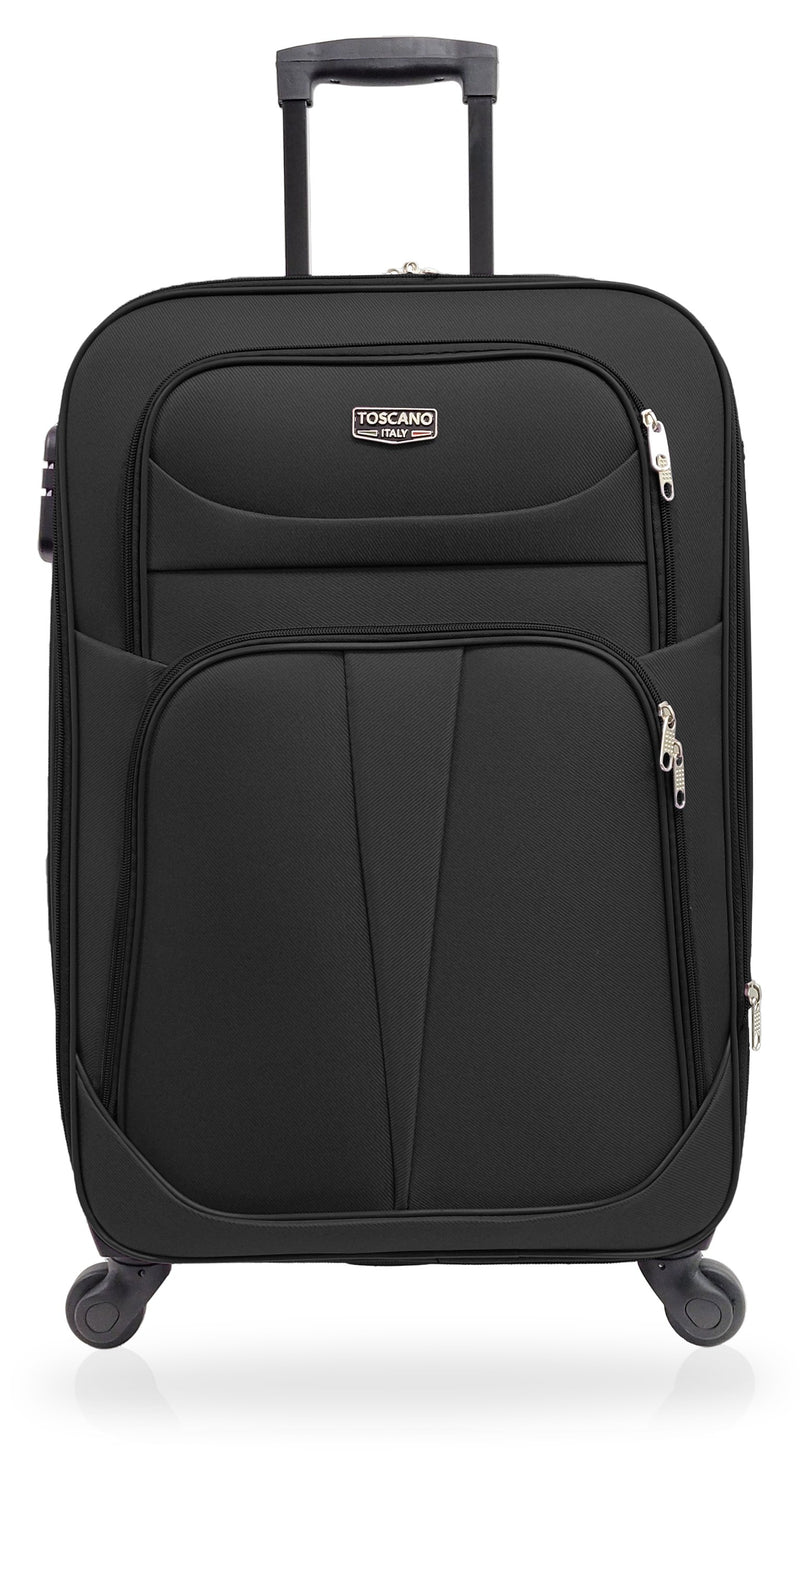 TOSCANO 20-inch Parata Carry On Lightweight Luggage Suitcase